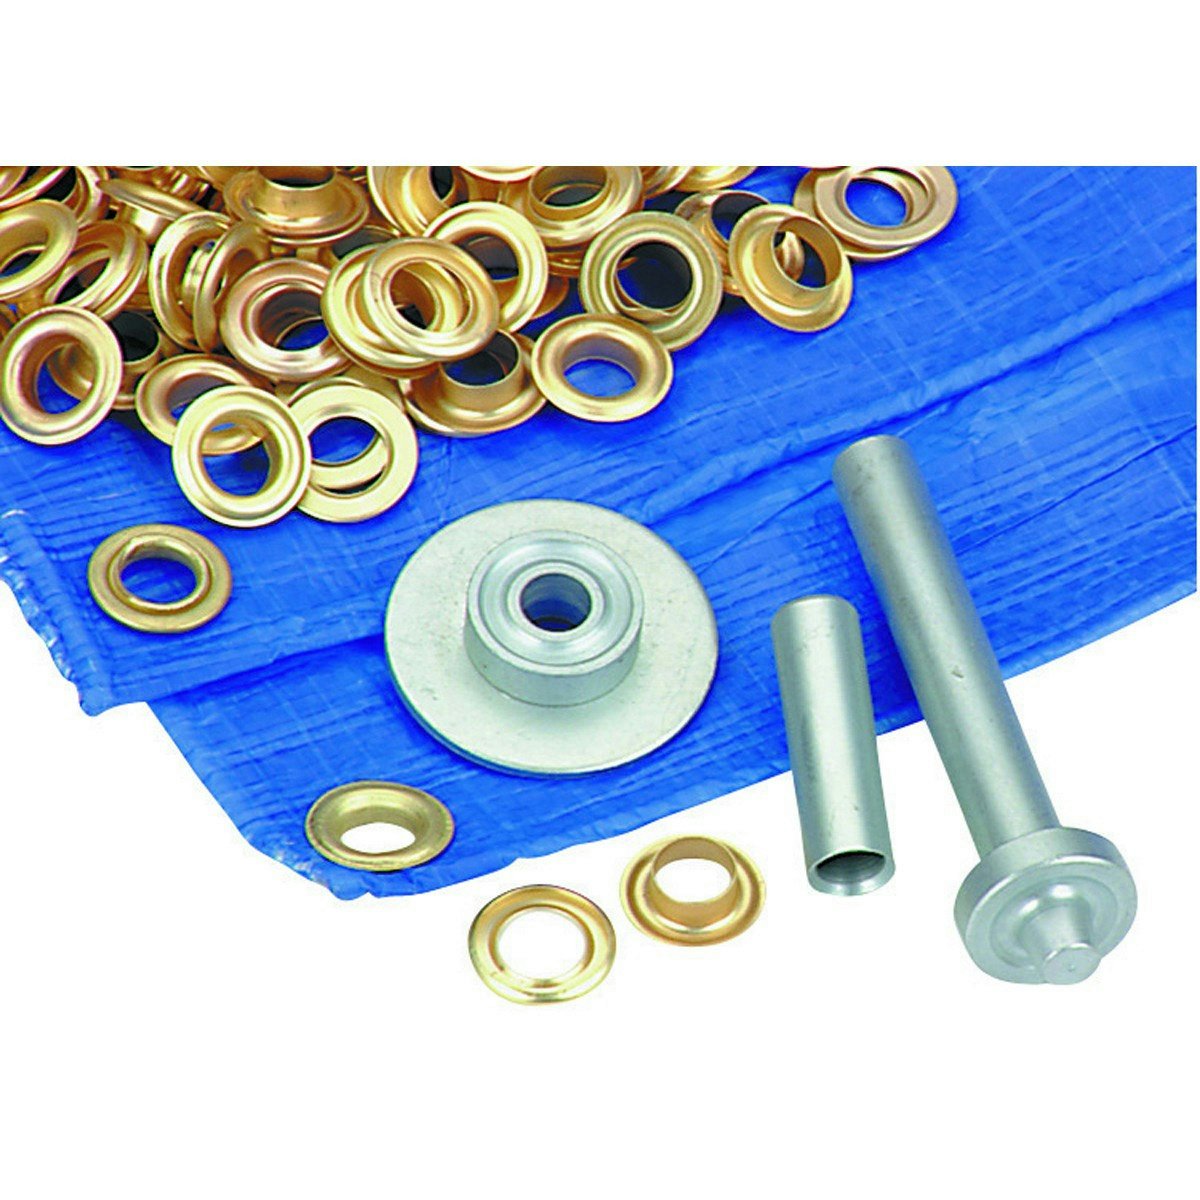 Grommets and Fasteners - Heavy Duty Tarps